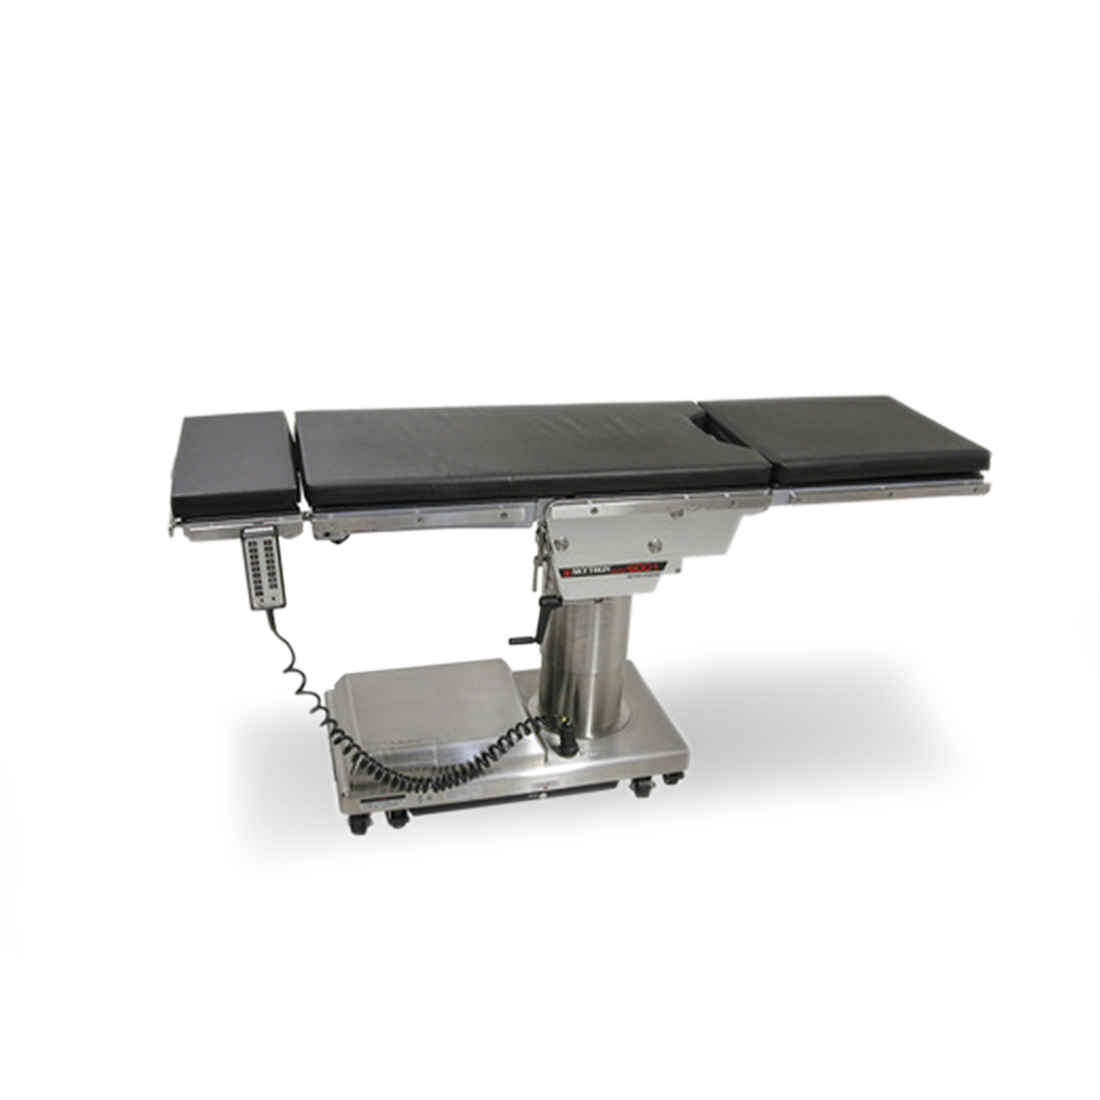 Skytron 6001 General Surgical Table